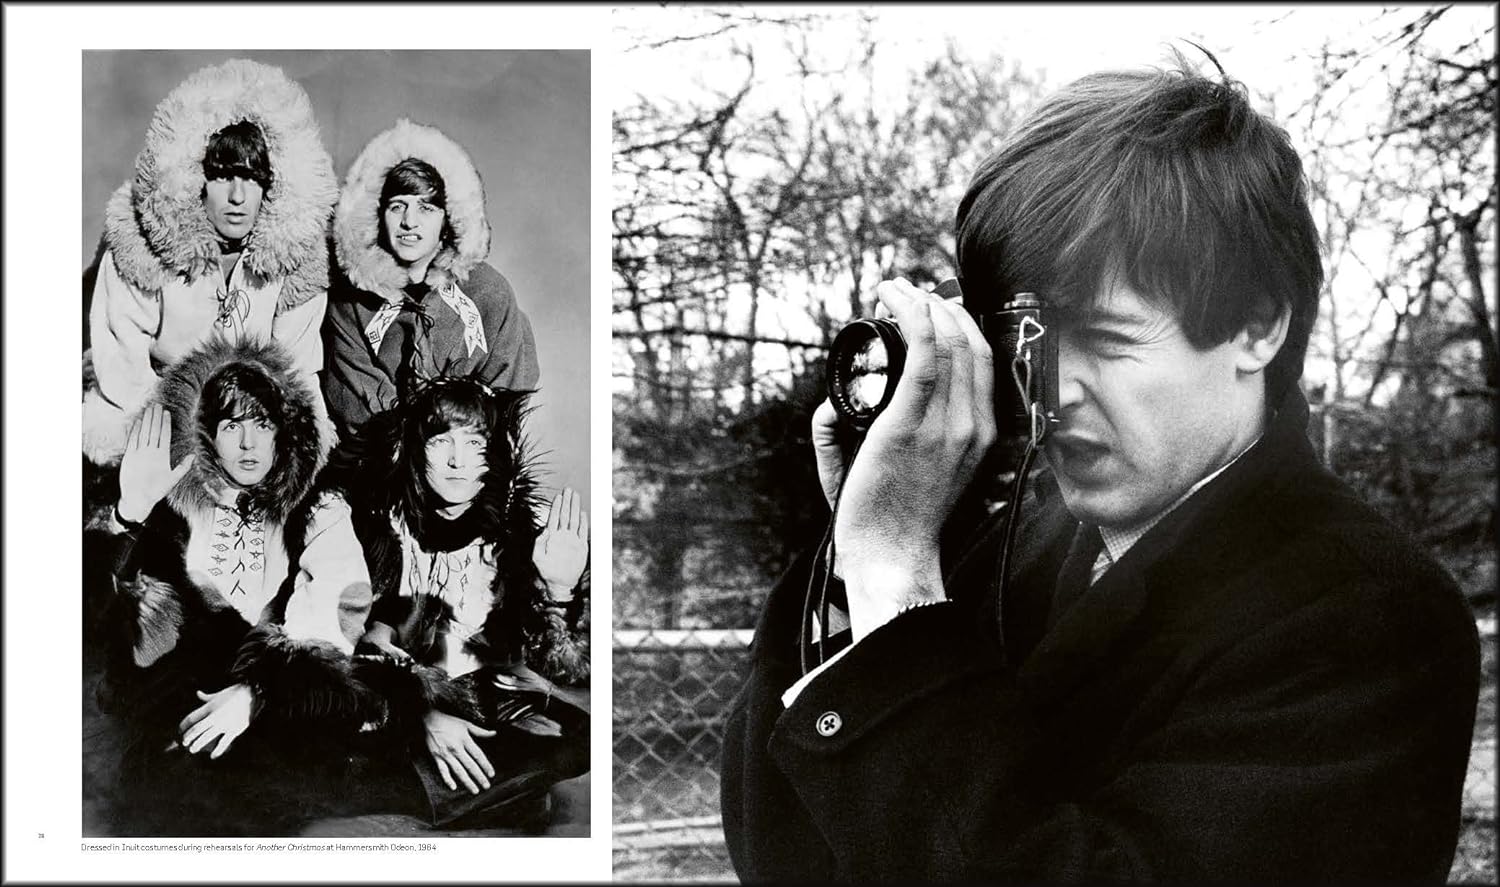 Terry O'Neill: The A-Z of Rock ‘N’ Roll